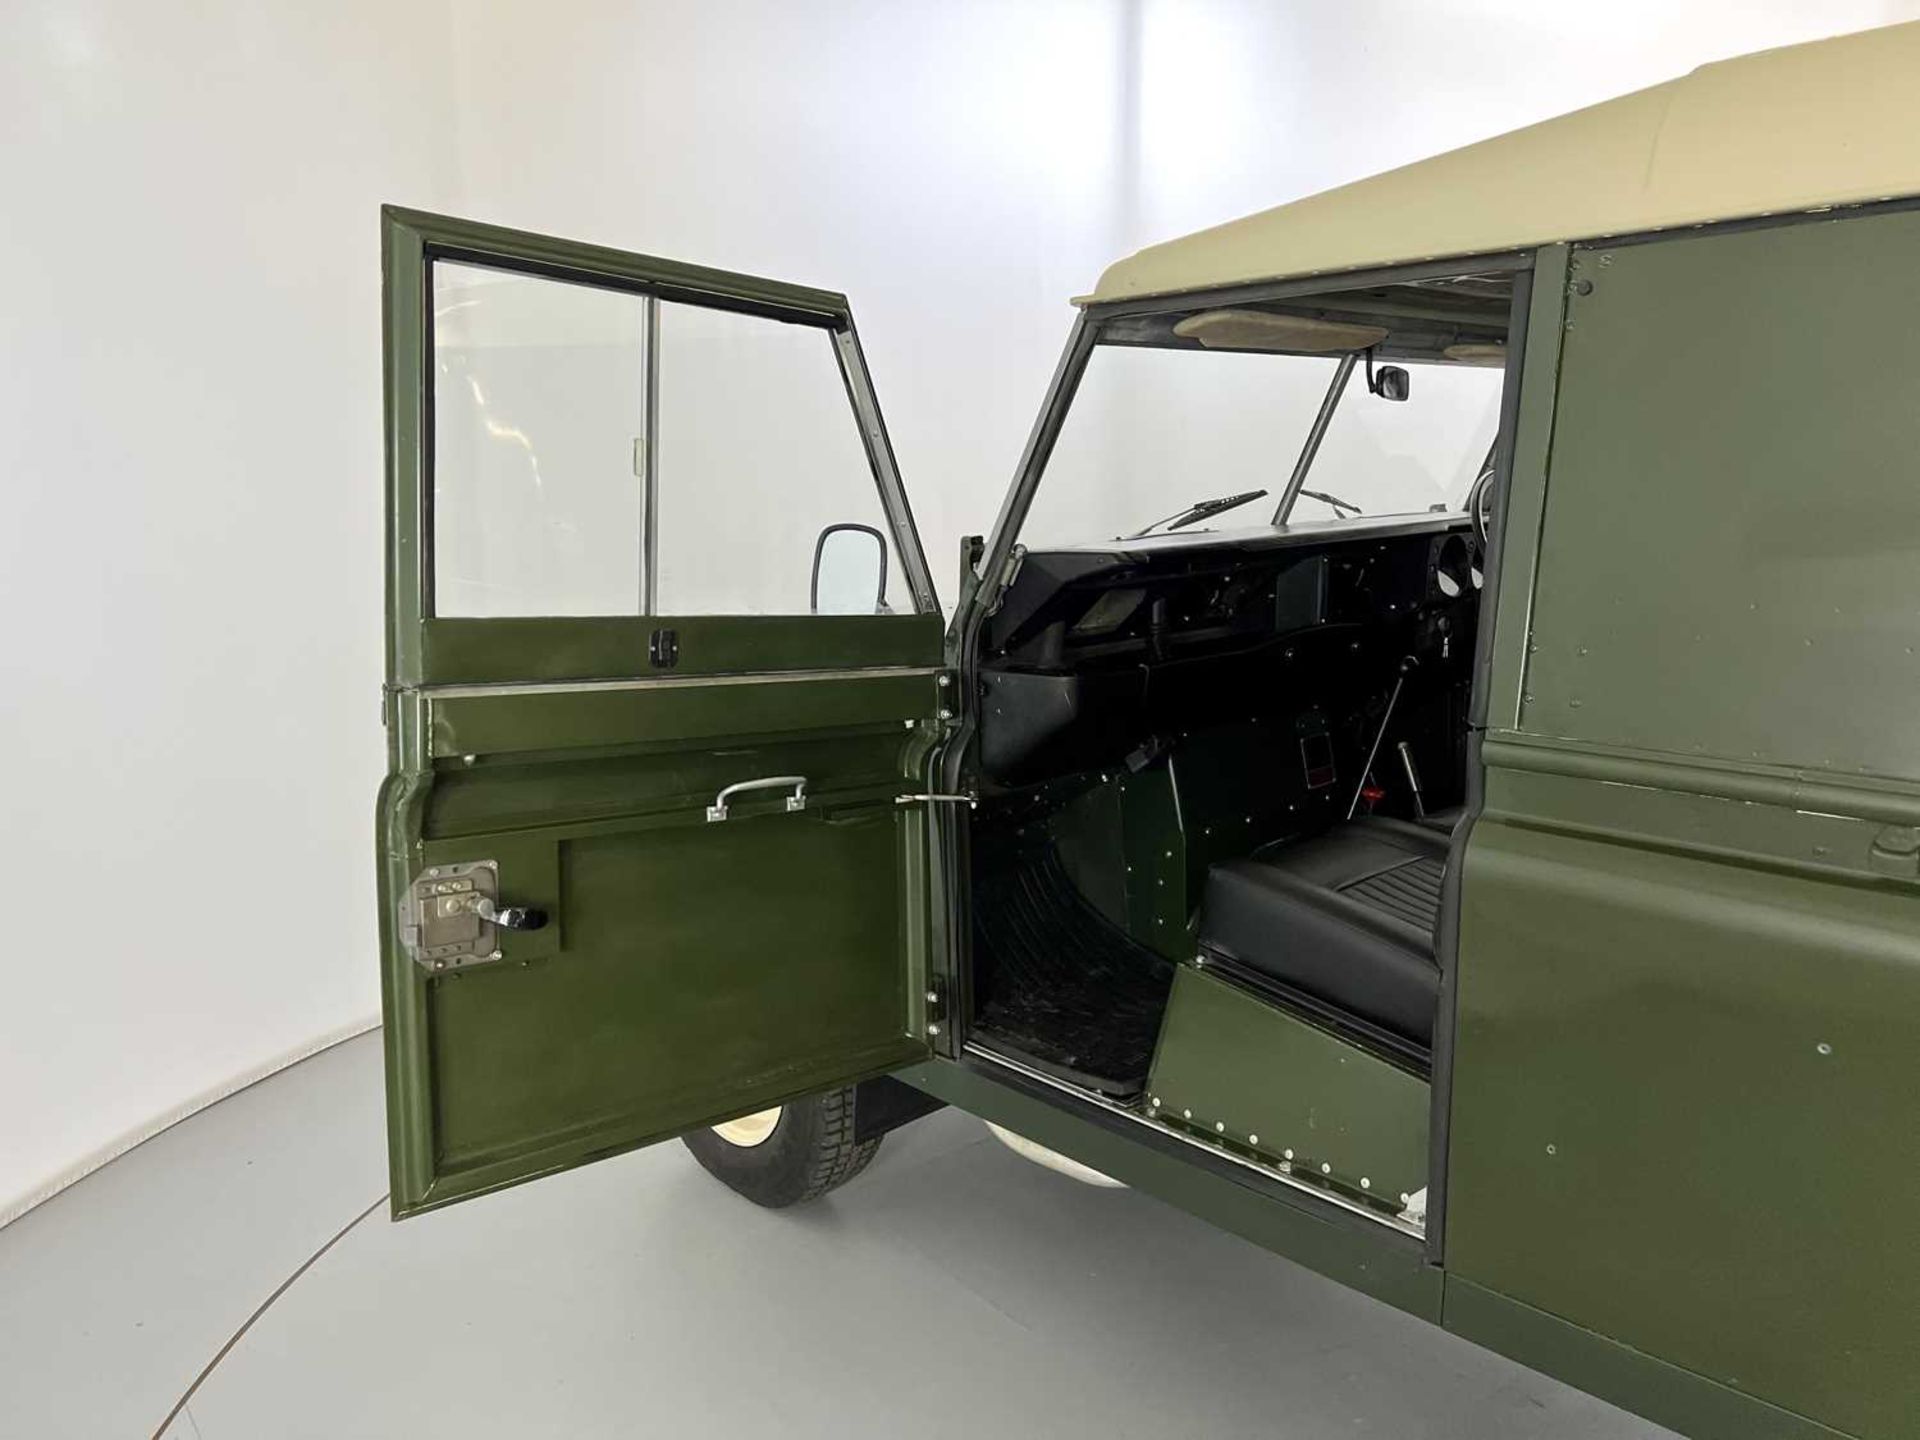 1981 Land Rover Series 3 - 6 Cylinder - Image 21 of 31